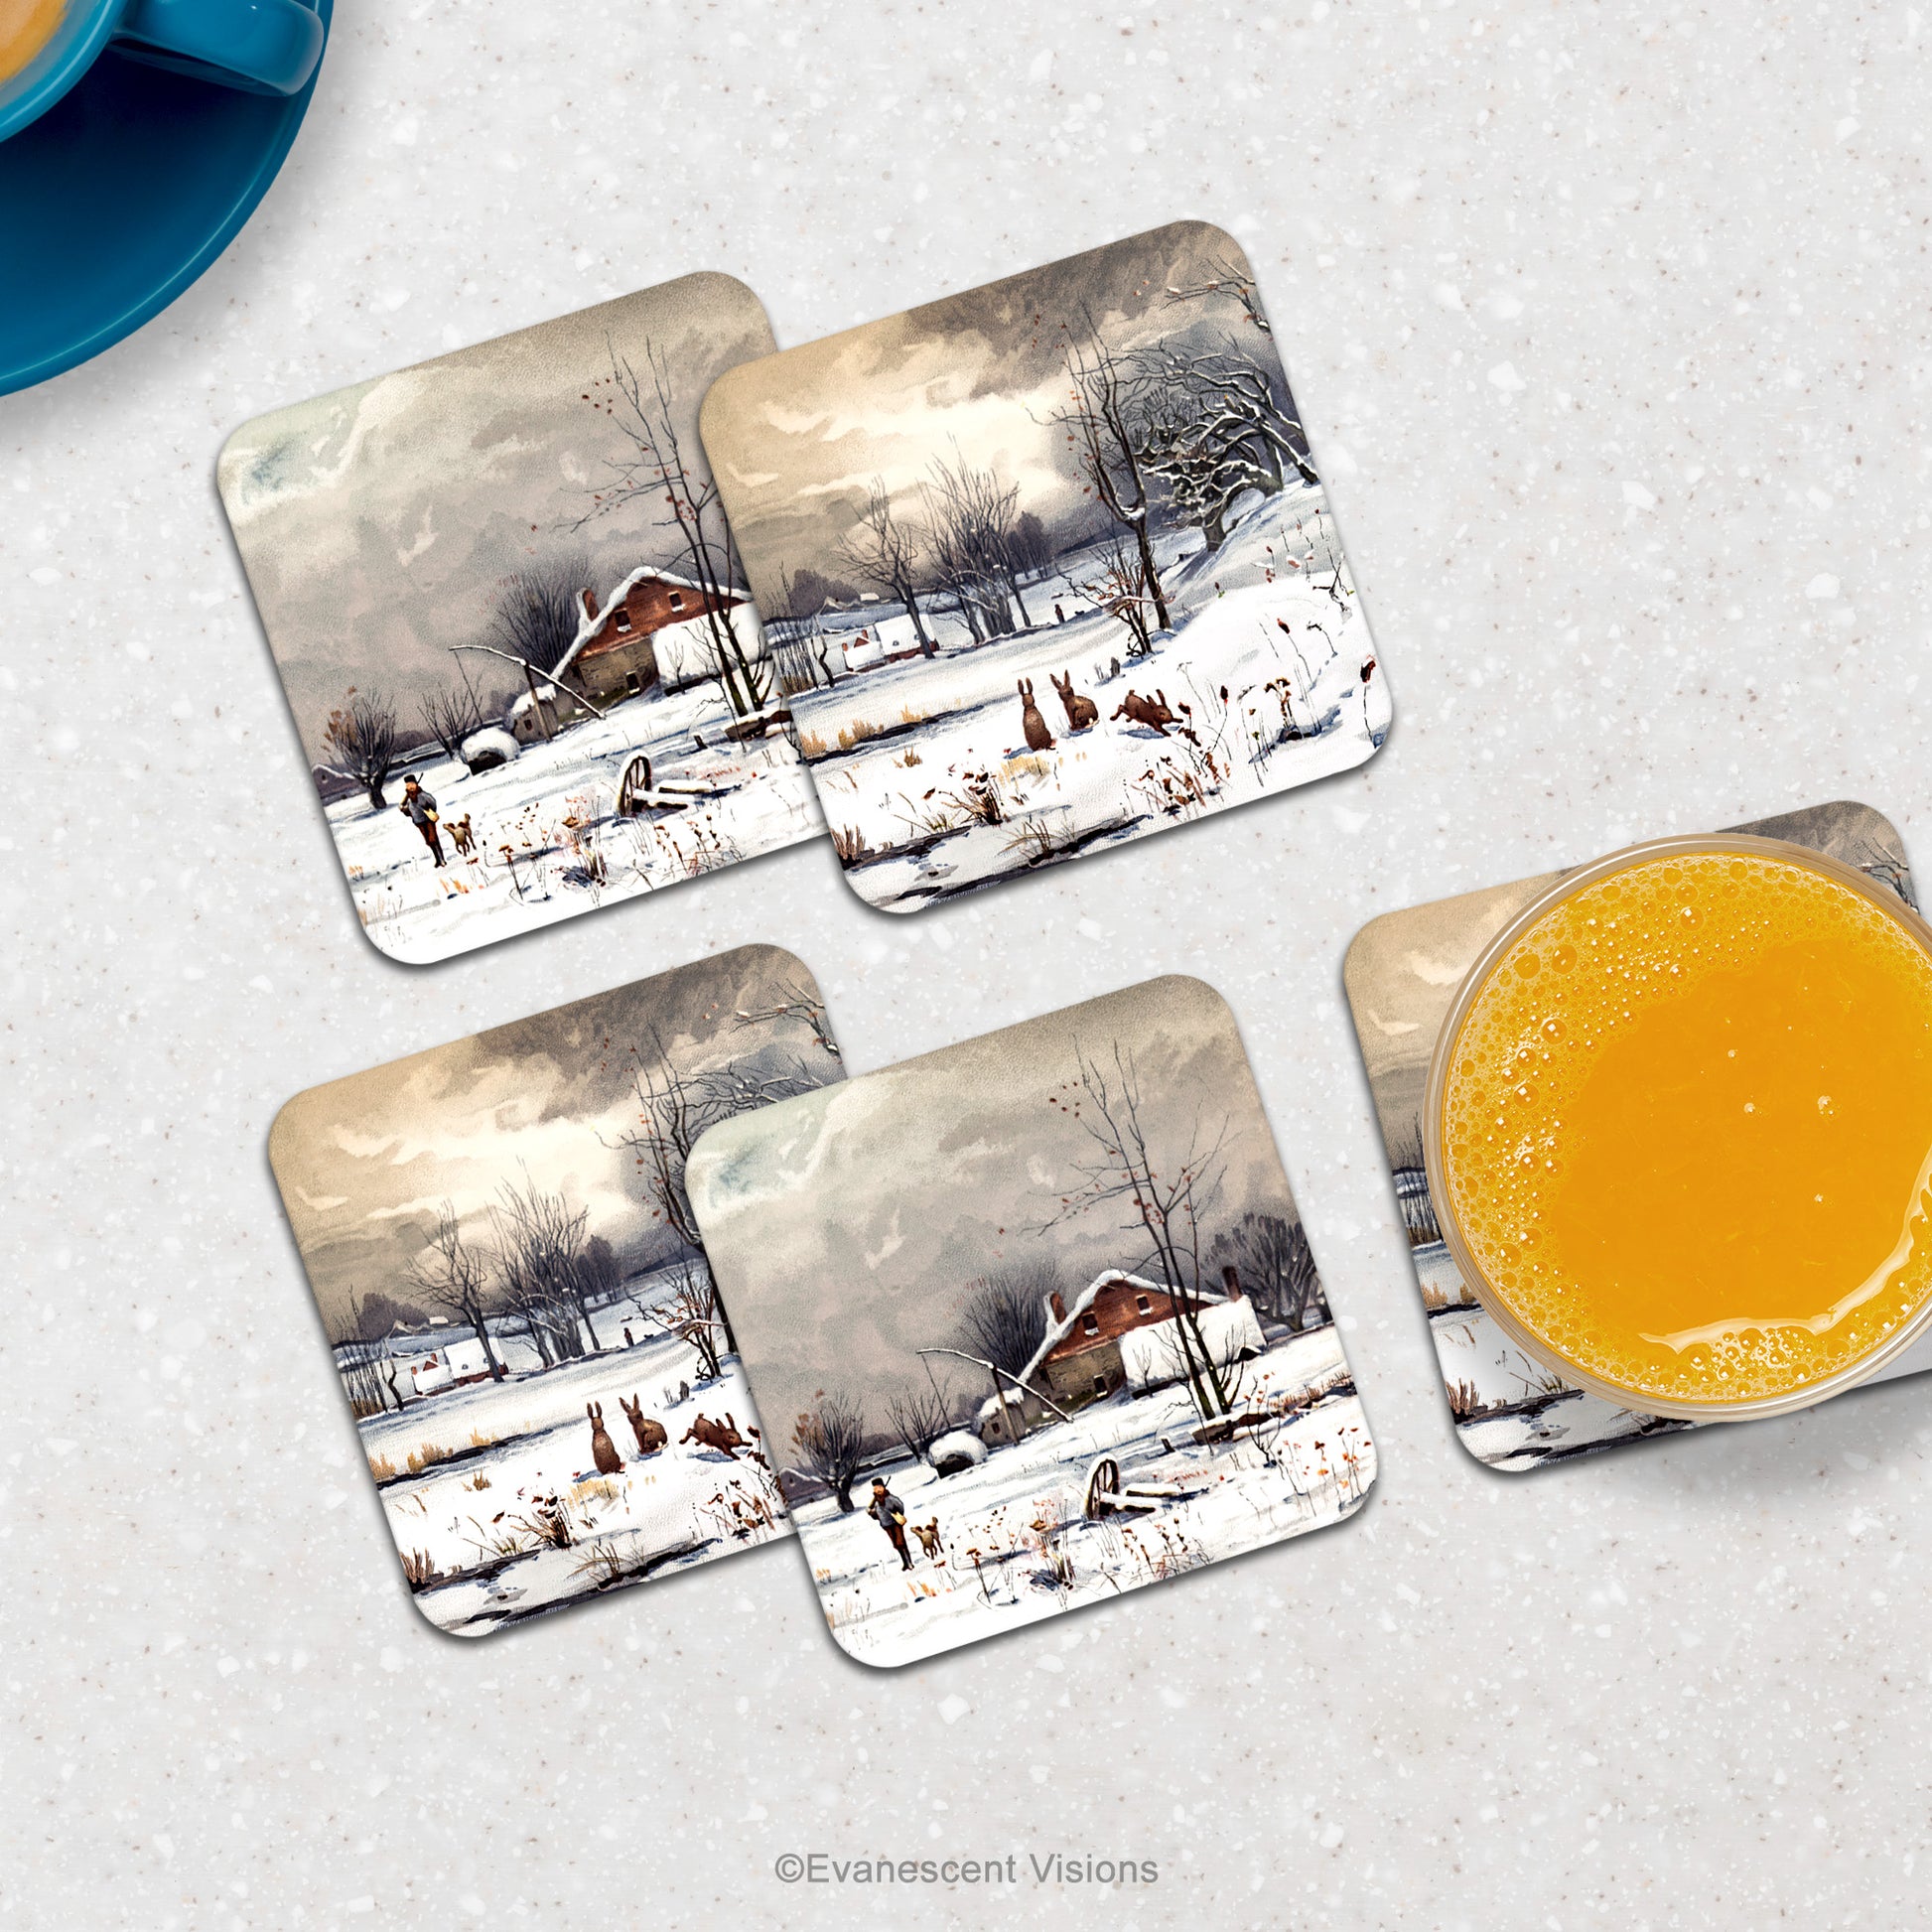 Counter top with snowy winter scene coasters and drinks